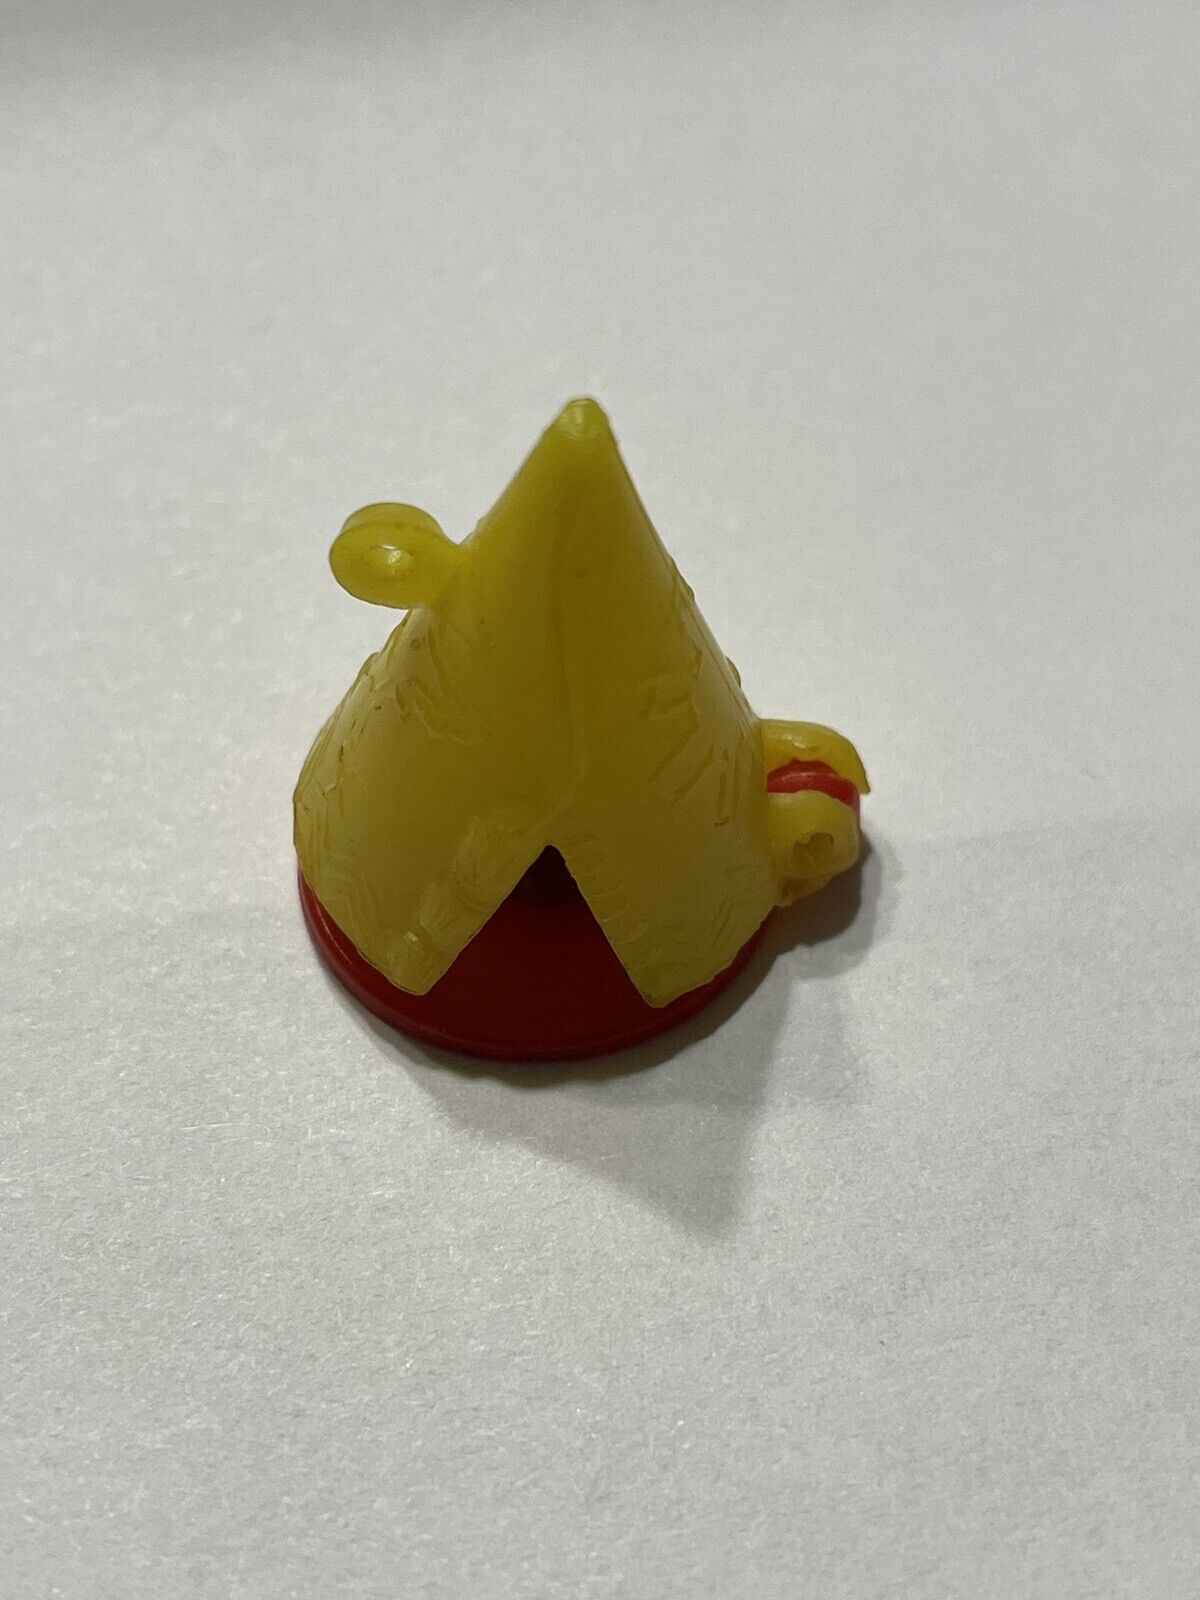 Very Rare Vintage Mechanical TEEPEE WIGAM with Indians Inside Gumball Charm Toy